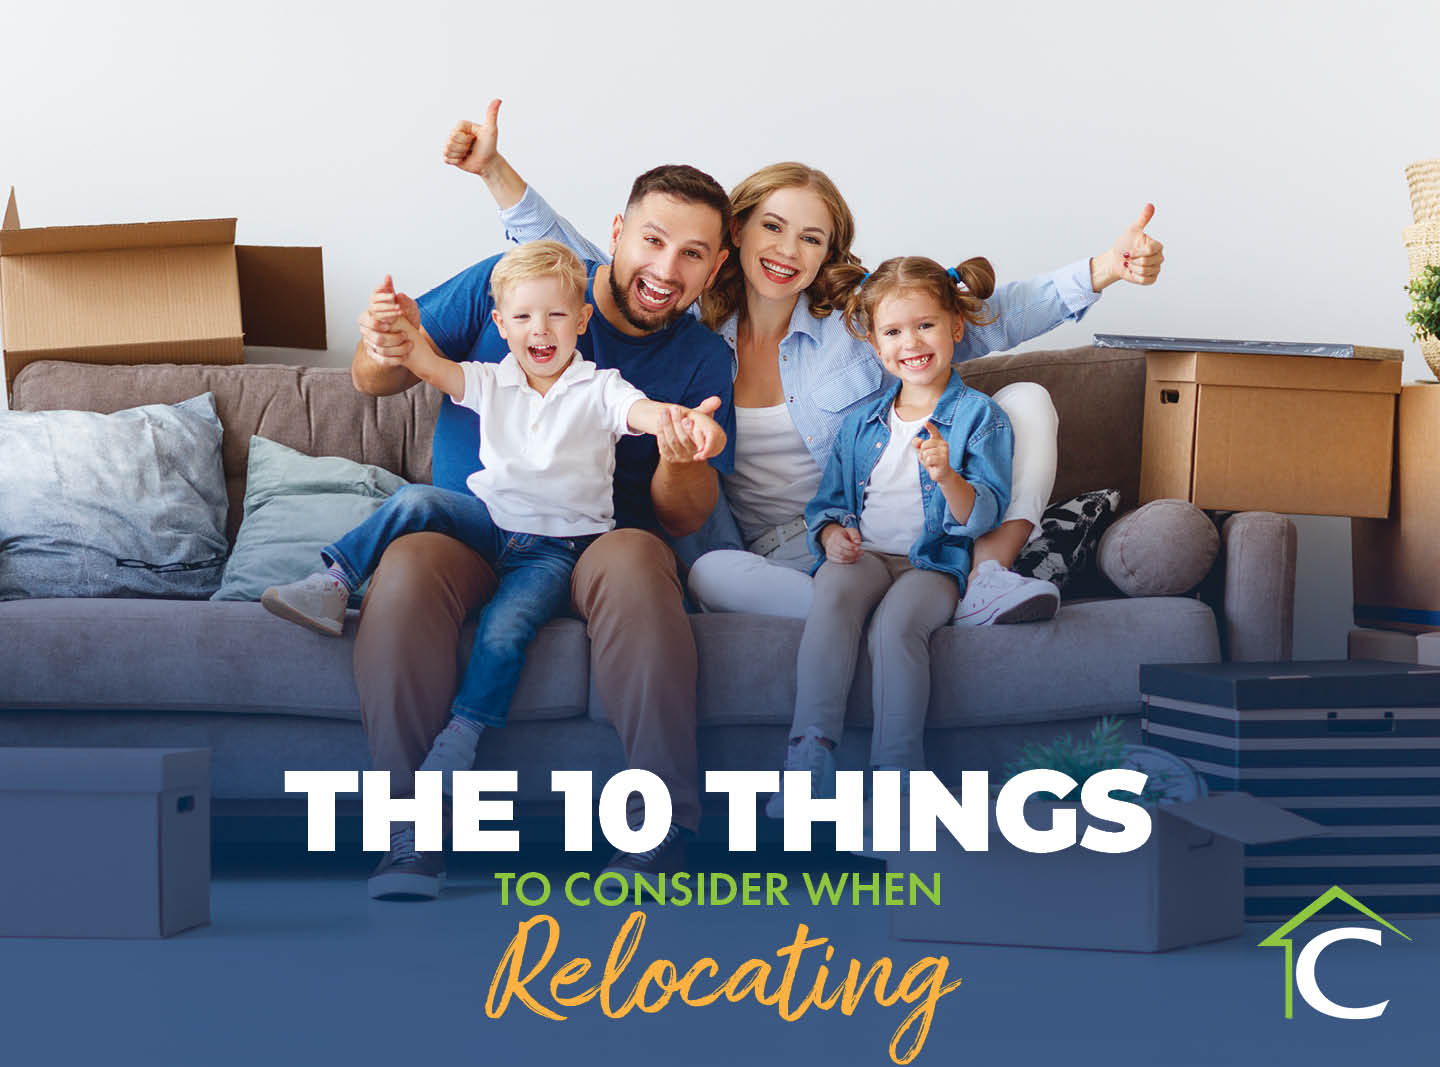 Top 10 Things to Consider When Relocating with happy couple smiling and giving thumbs up